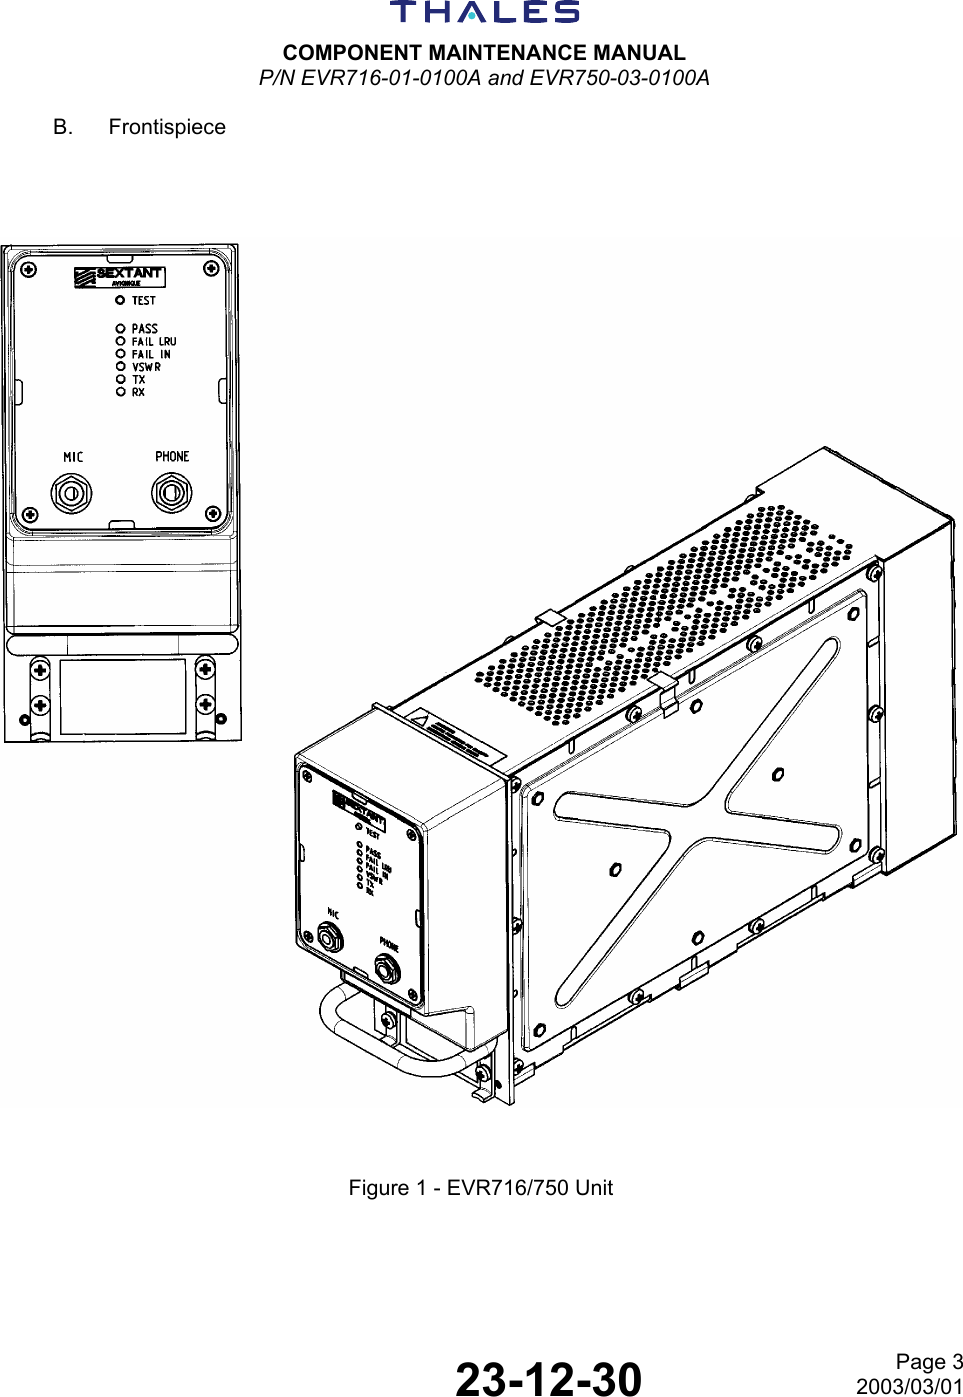  COMPONENT MAINTENANCE MANUAL P/N EVR716-01-0100A and EVR750-03-0100A   23-12-30 Page 32003/03/01 B. Frontispiece       Figure 1 - EVR716/750 Unit 